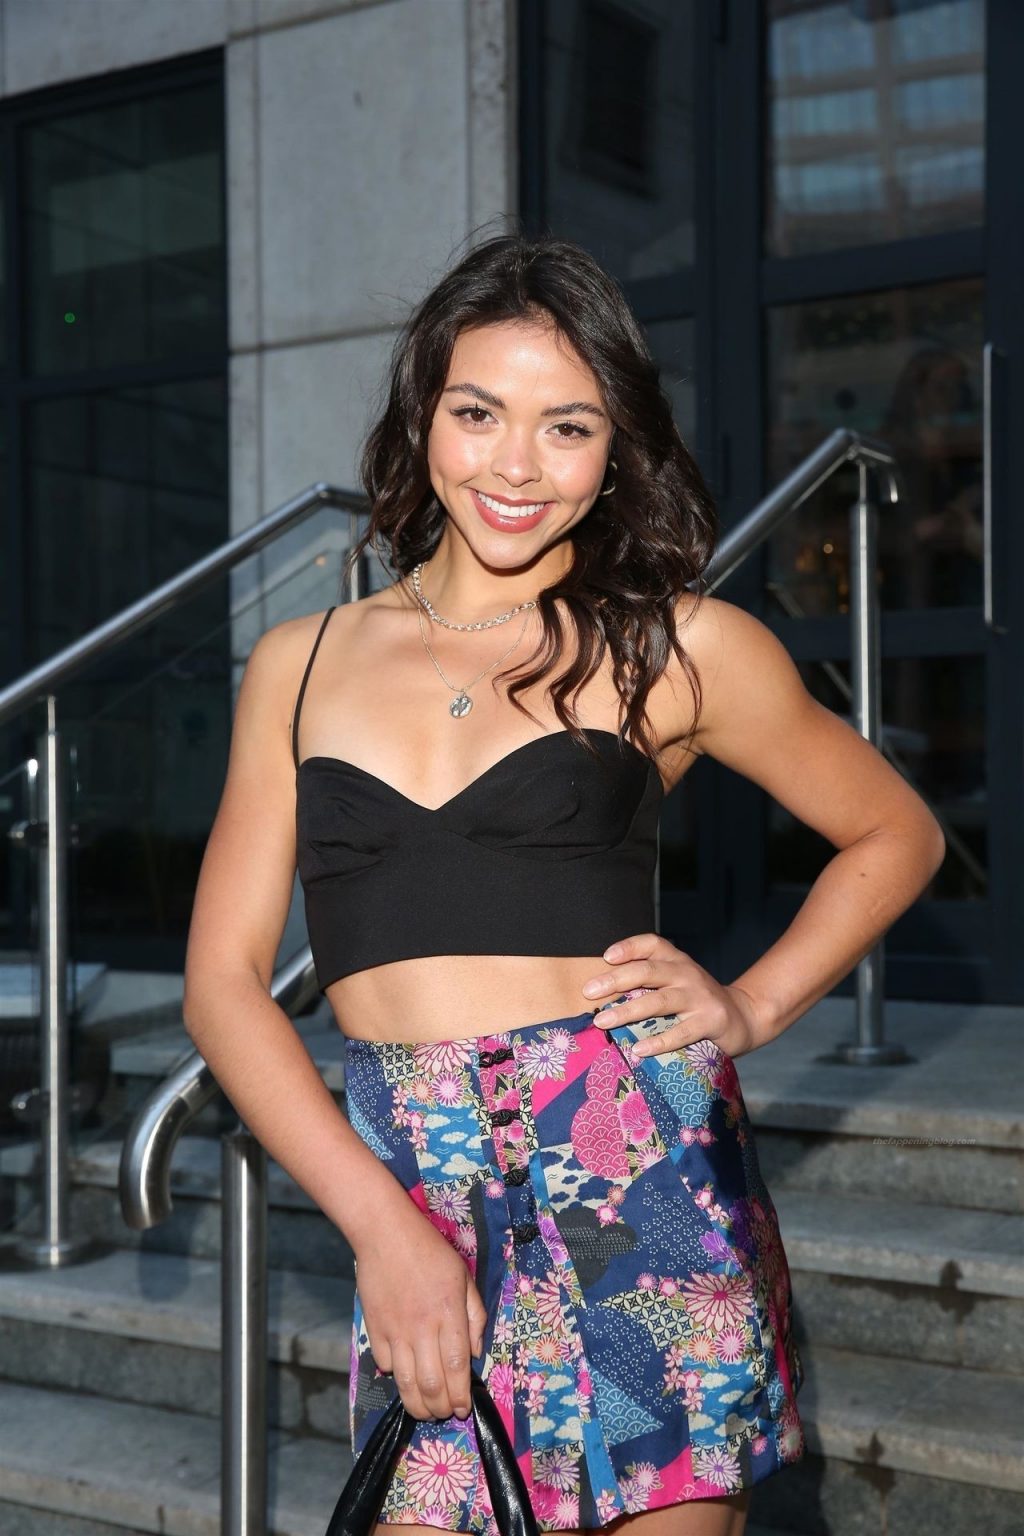 Leggy Vanessa Bauer Poses in a Tiny Cropped Top and Mini Skirt in London (37 Photos)